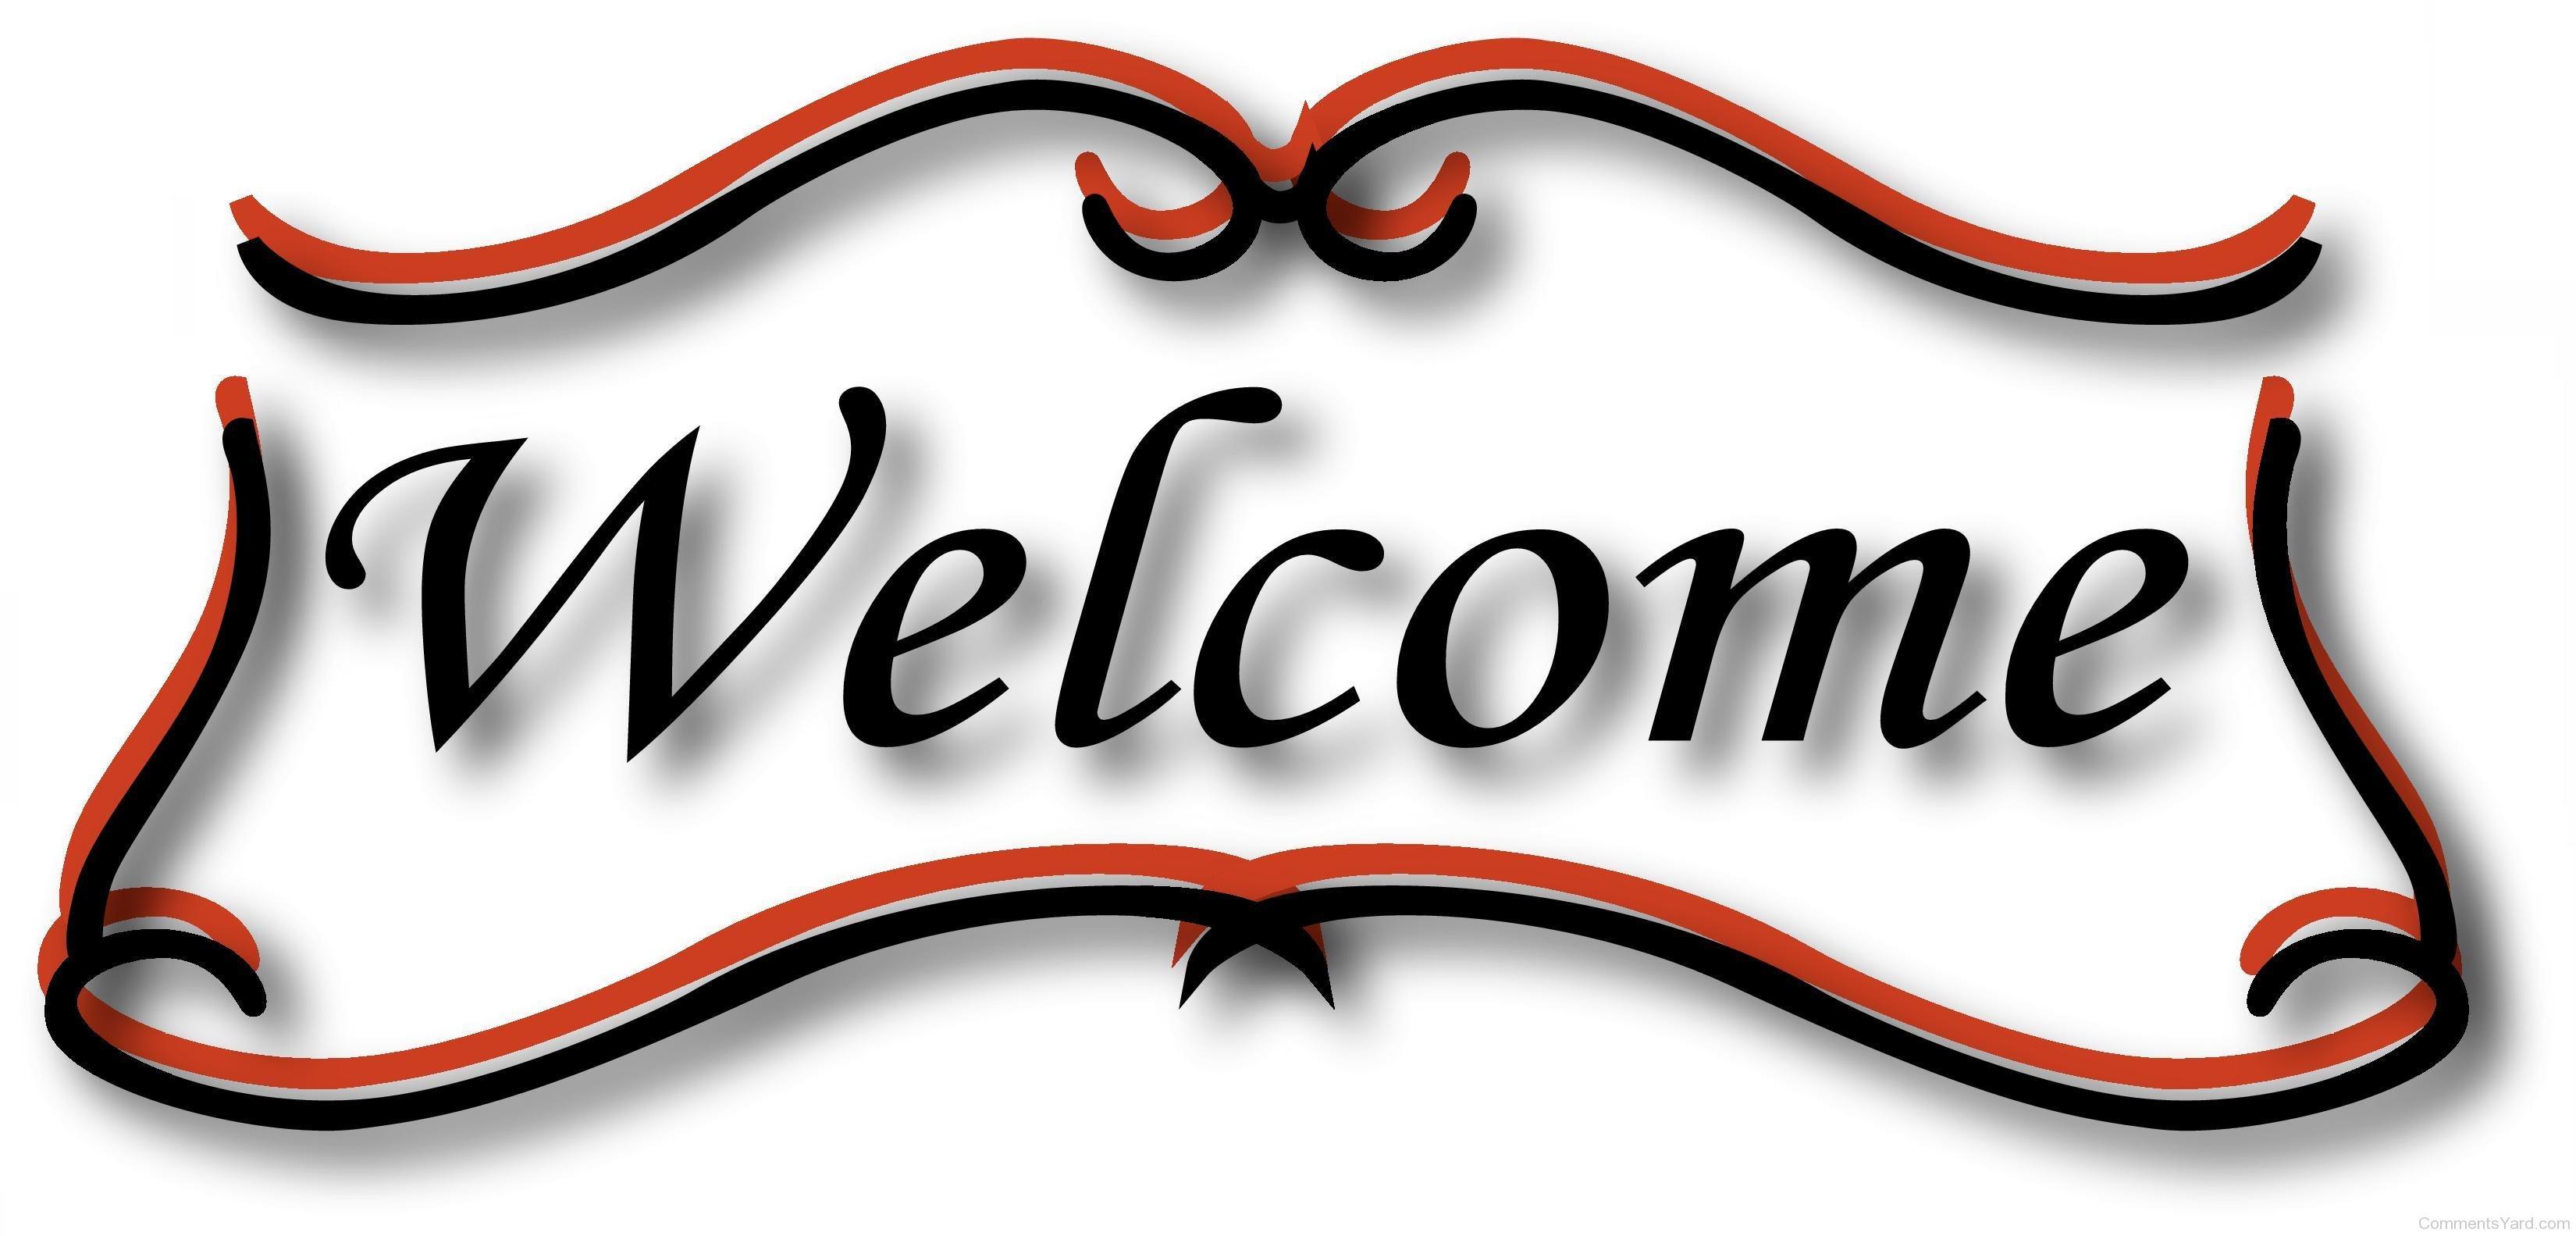 Welcoming Image Free. Free download best Welcoming Image